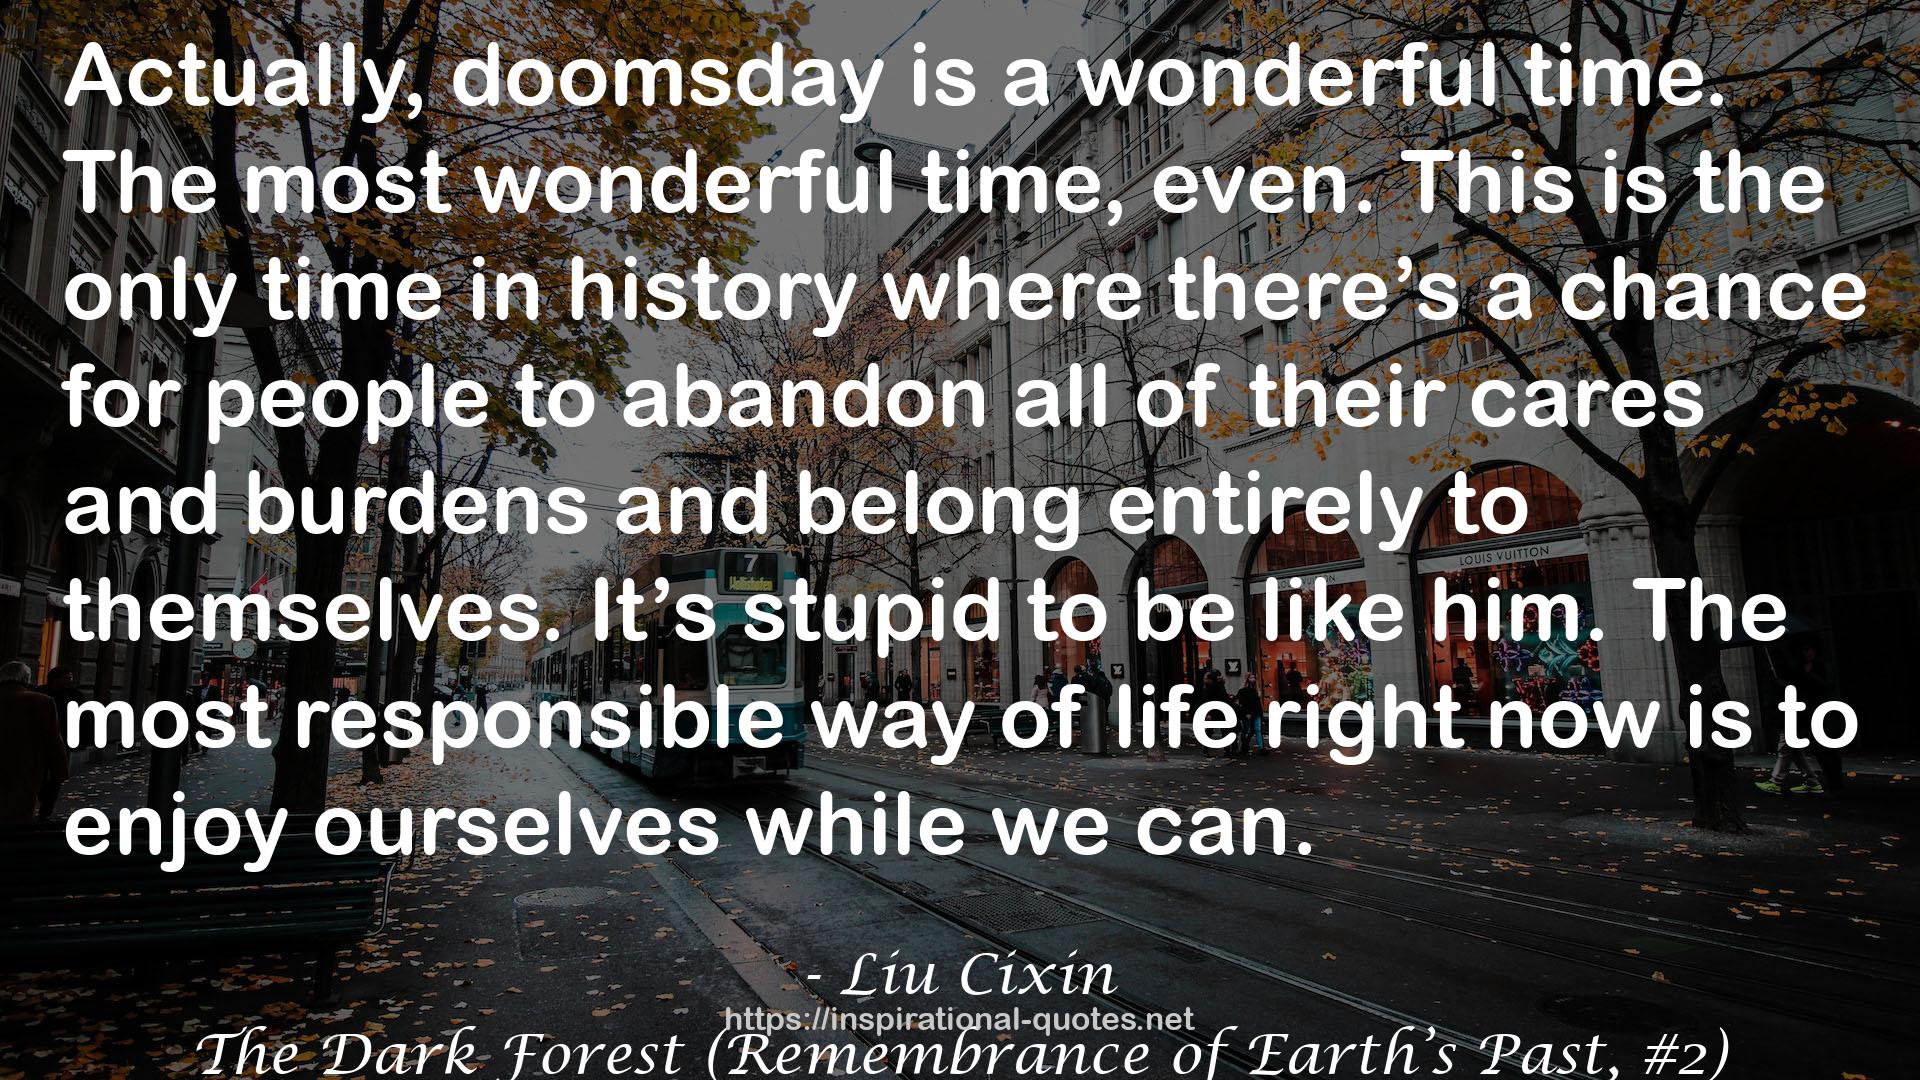 The Dark Forest (Remembrance of Earth’s Past, #2) QUOTES